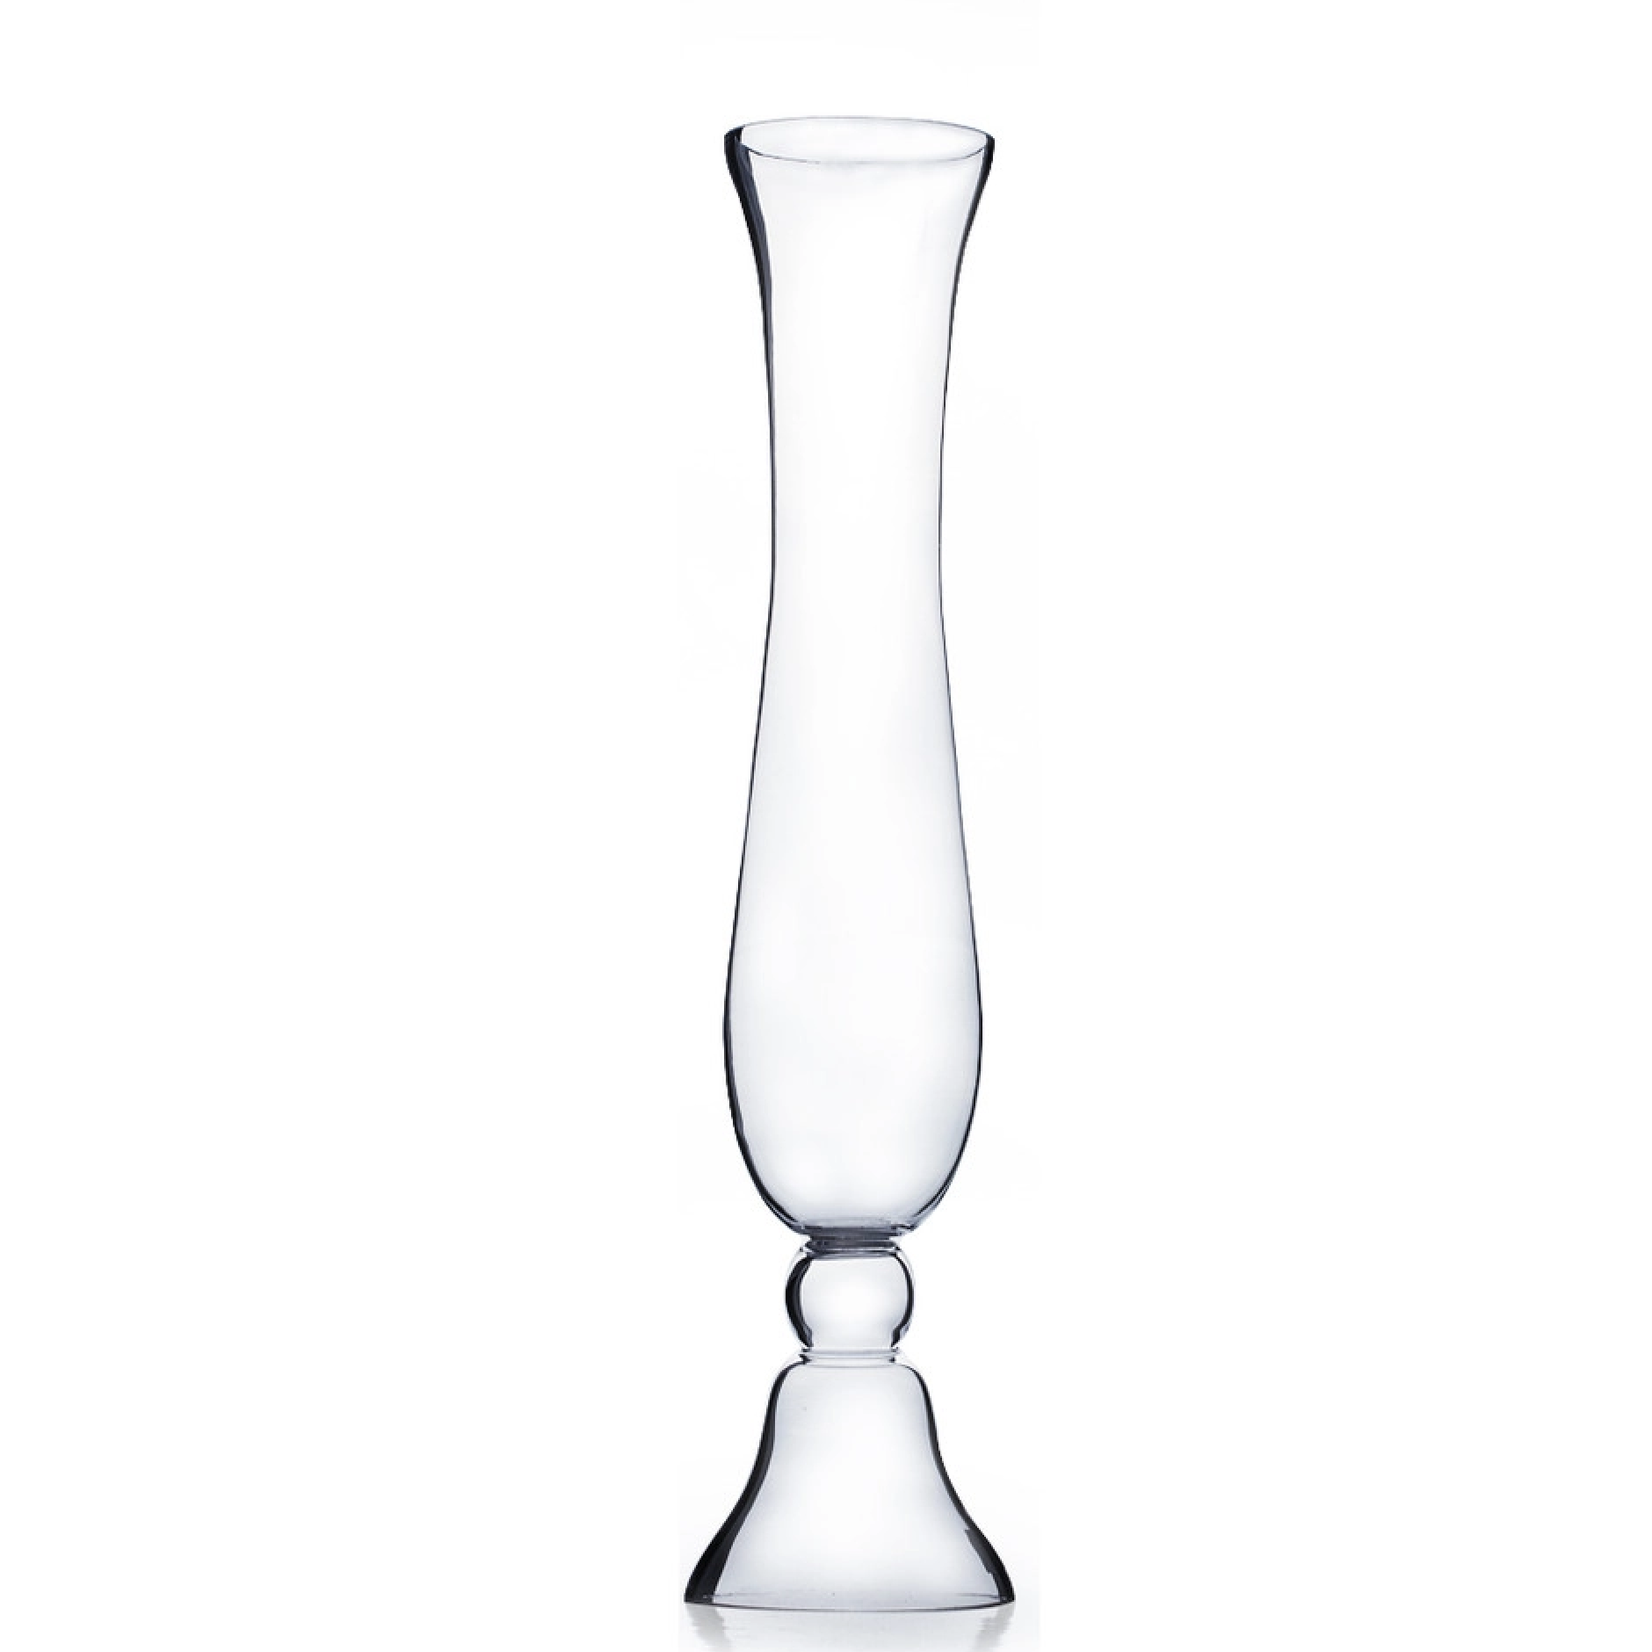 40% off was $50 now $30. 24" X 6" GLASS TRUMPET VASE